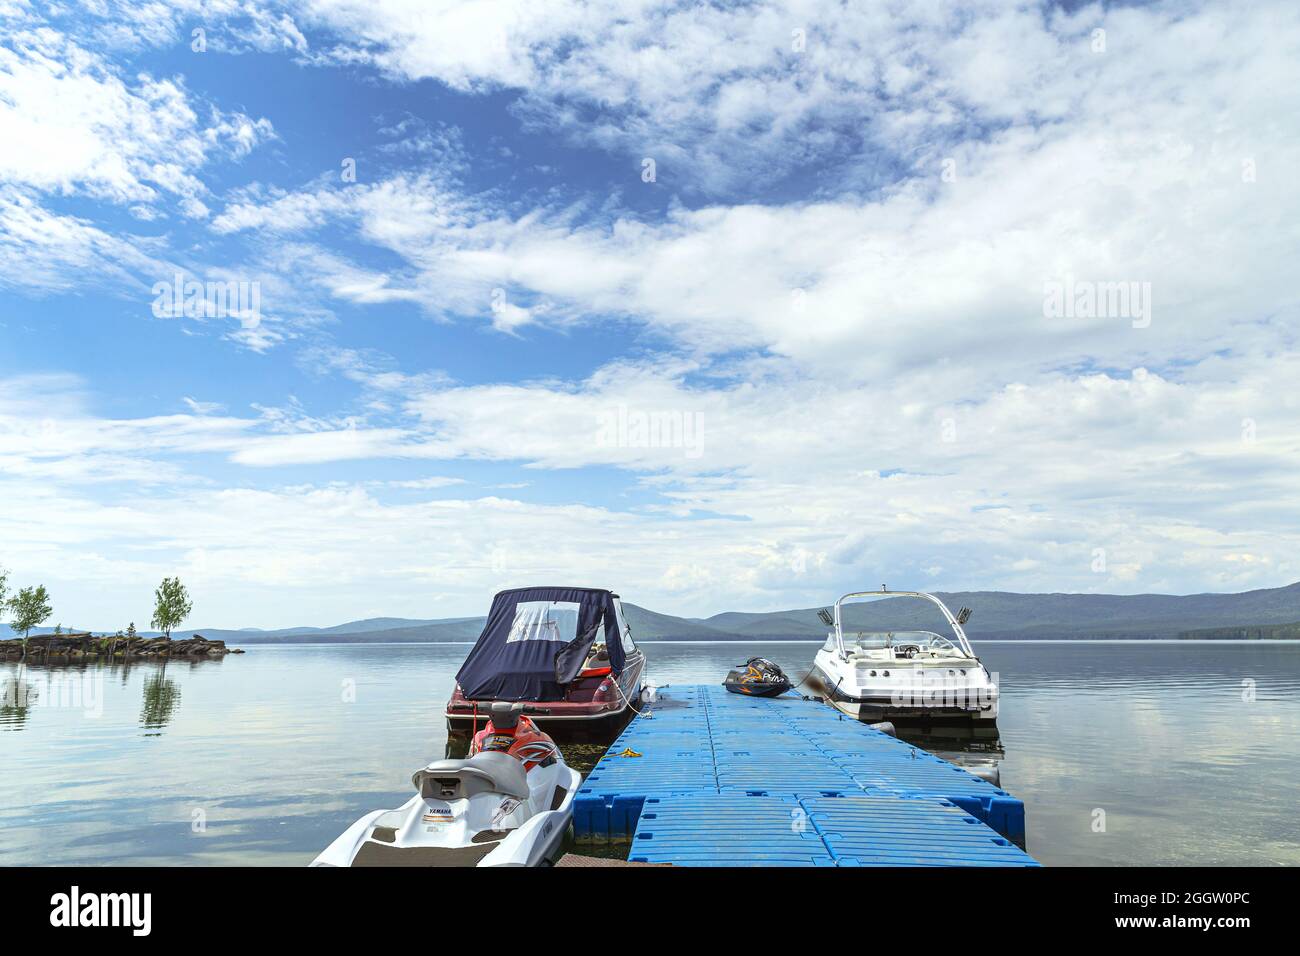 Miass, Russia - June 7, 2016: boats near pier on lake in background blue sky and mountains Stock Photo